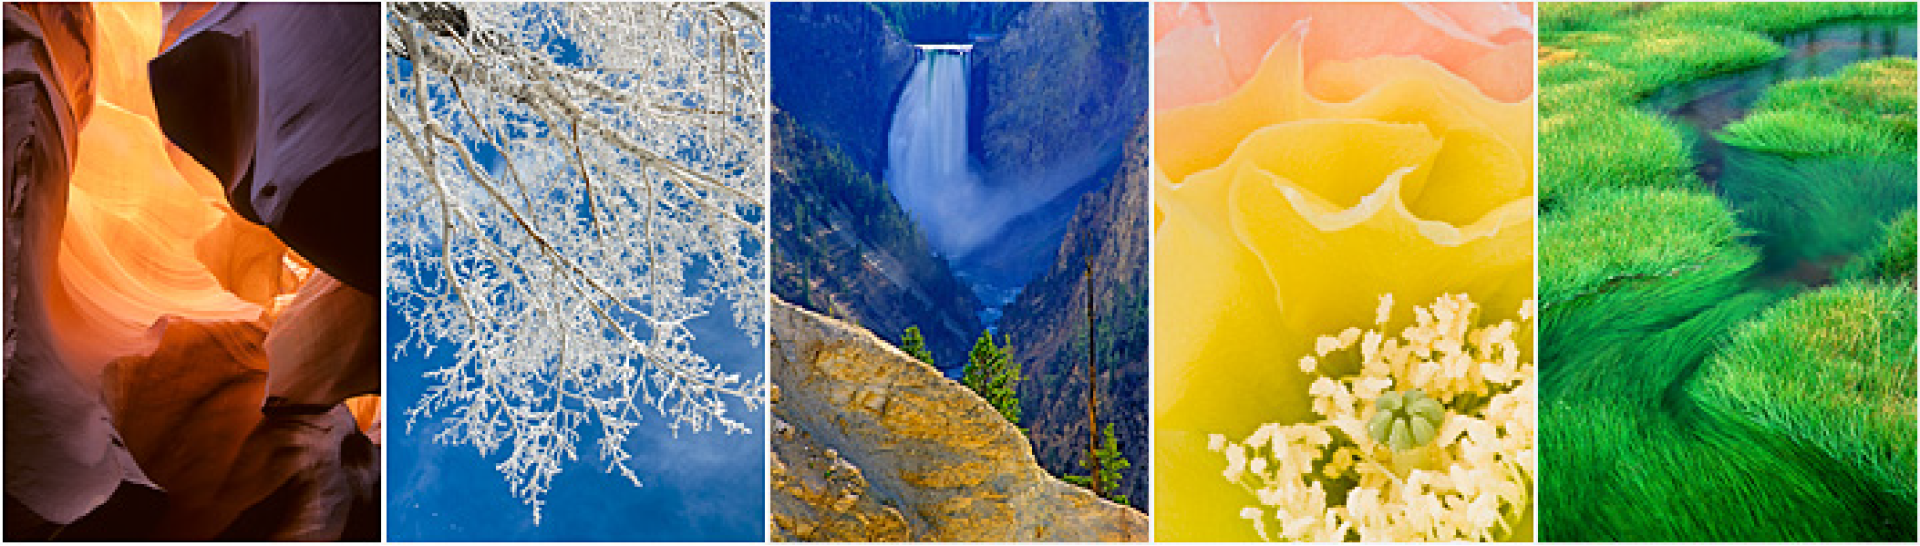 Canyon, Frosted tree, waterfall, yellow flower and grass